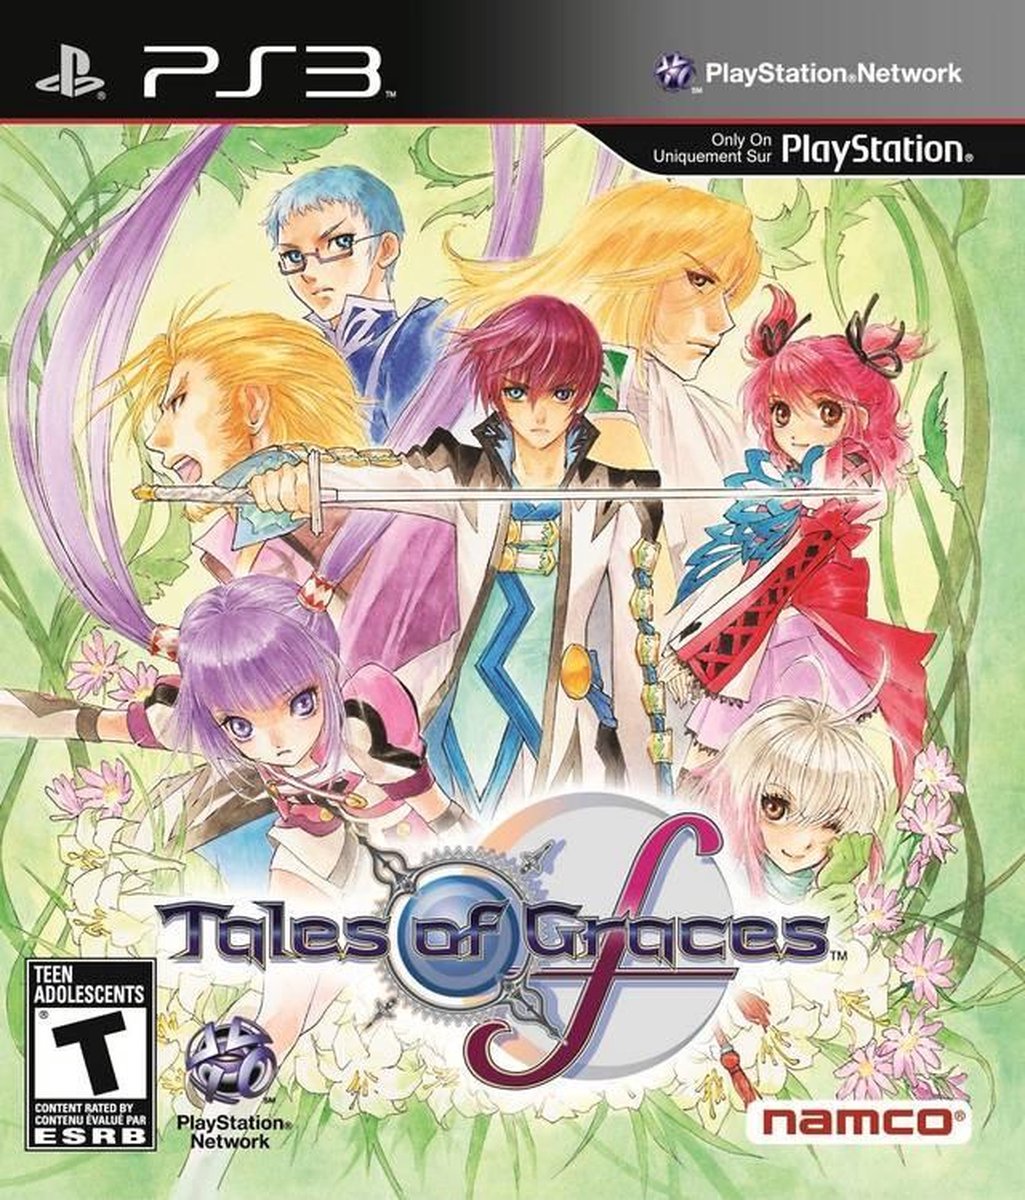 Namco Tales of Graces F